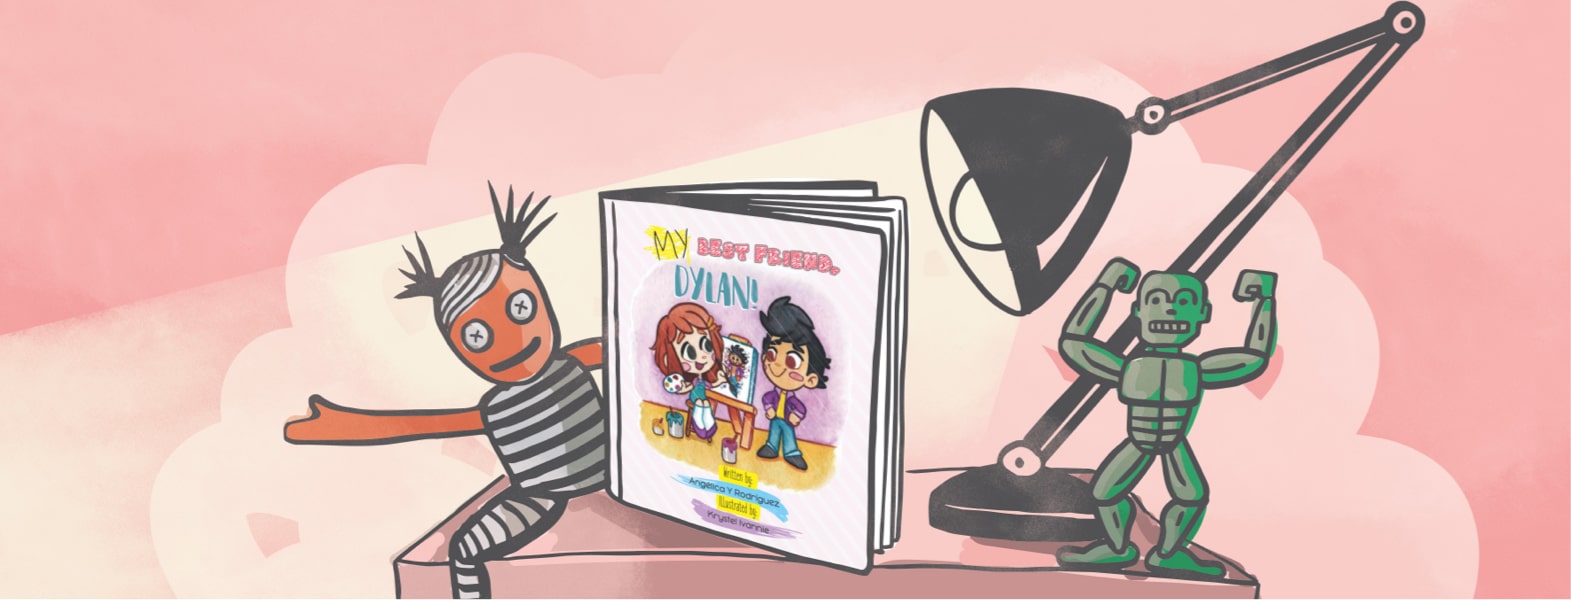 The children's book" My Best Friend Dylan!" sits on a toy shelf with a lamp shinning down.